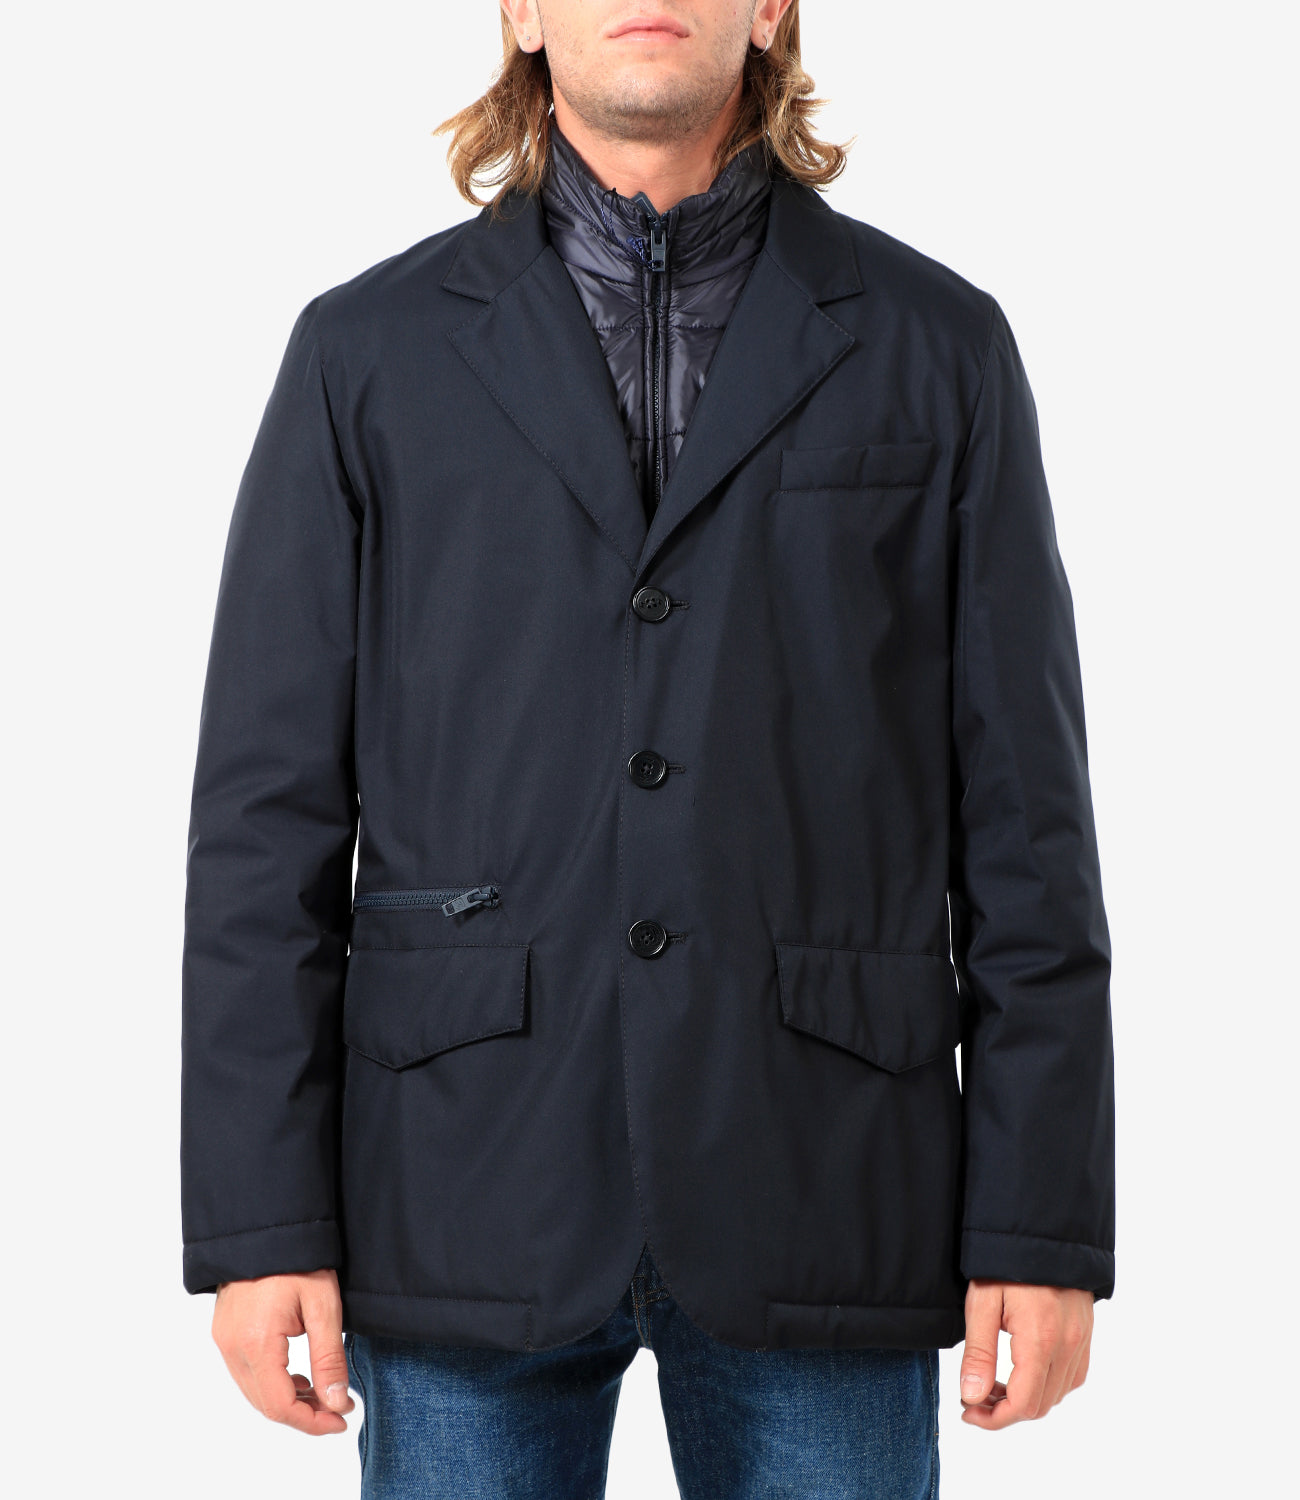 Double Front Navy Blue Jacket